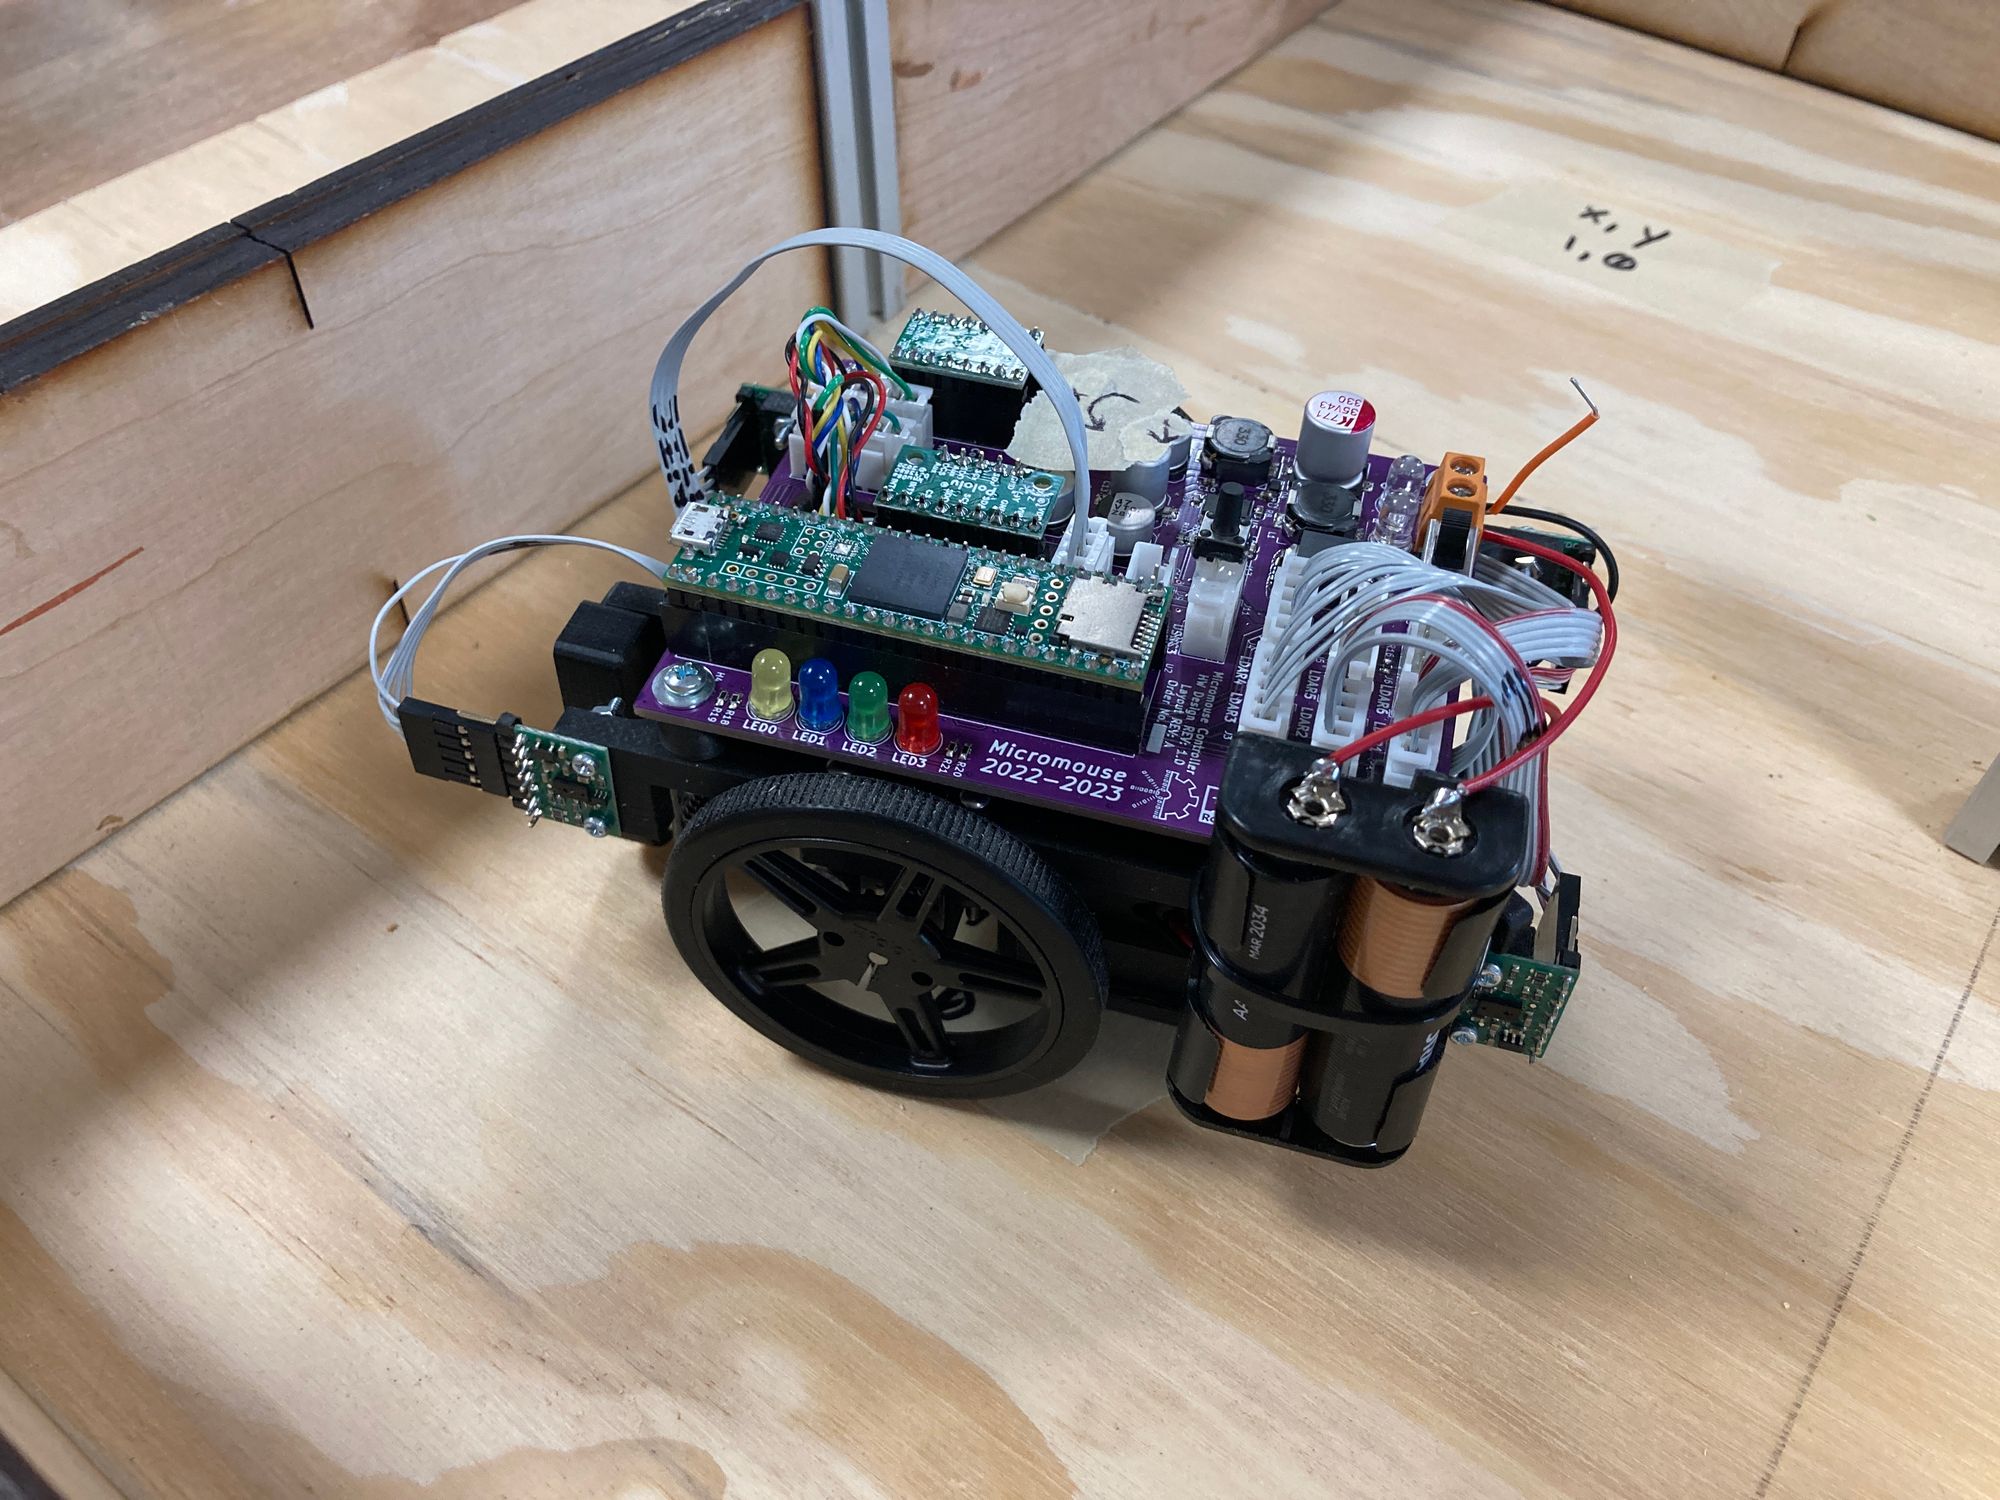 A picture of a small robot with two wheels and exposed wires